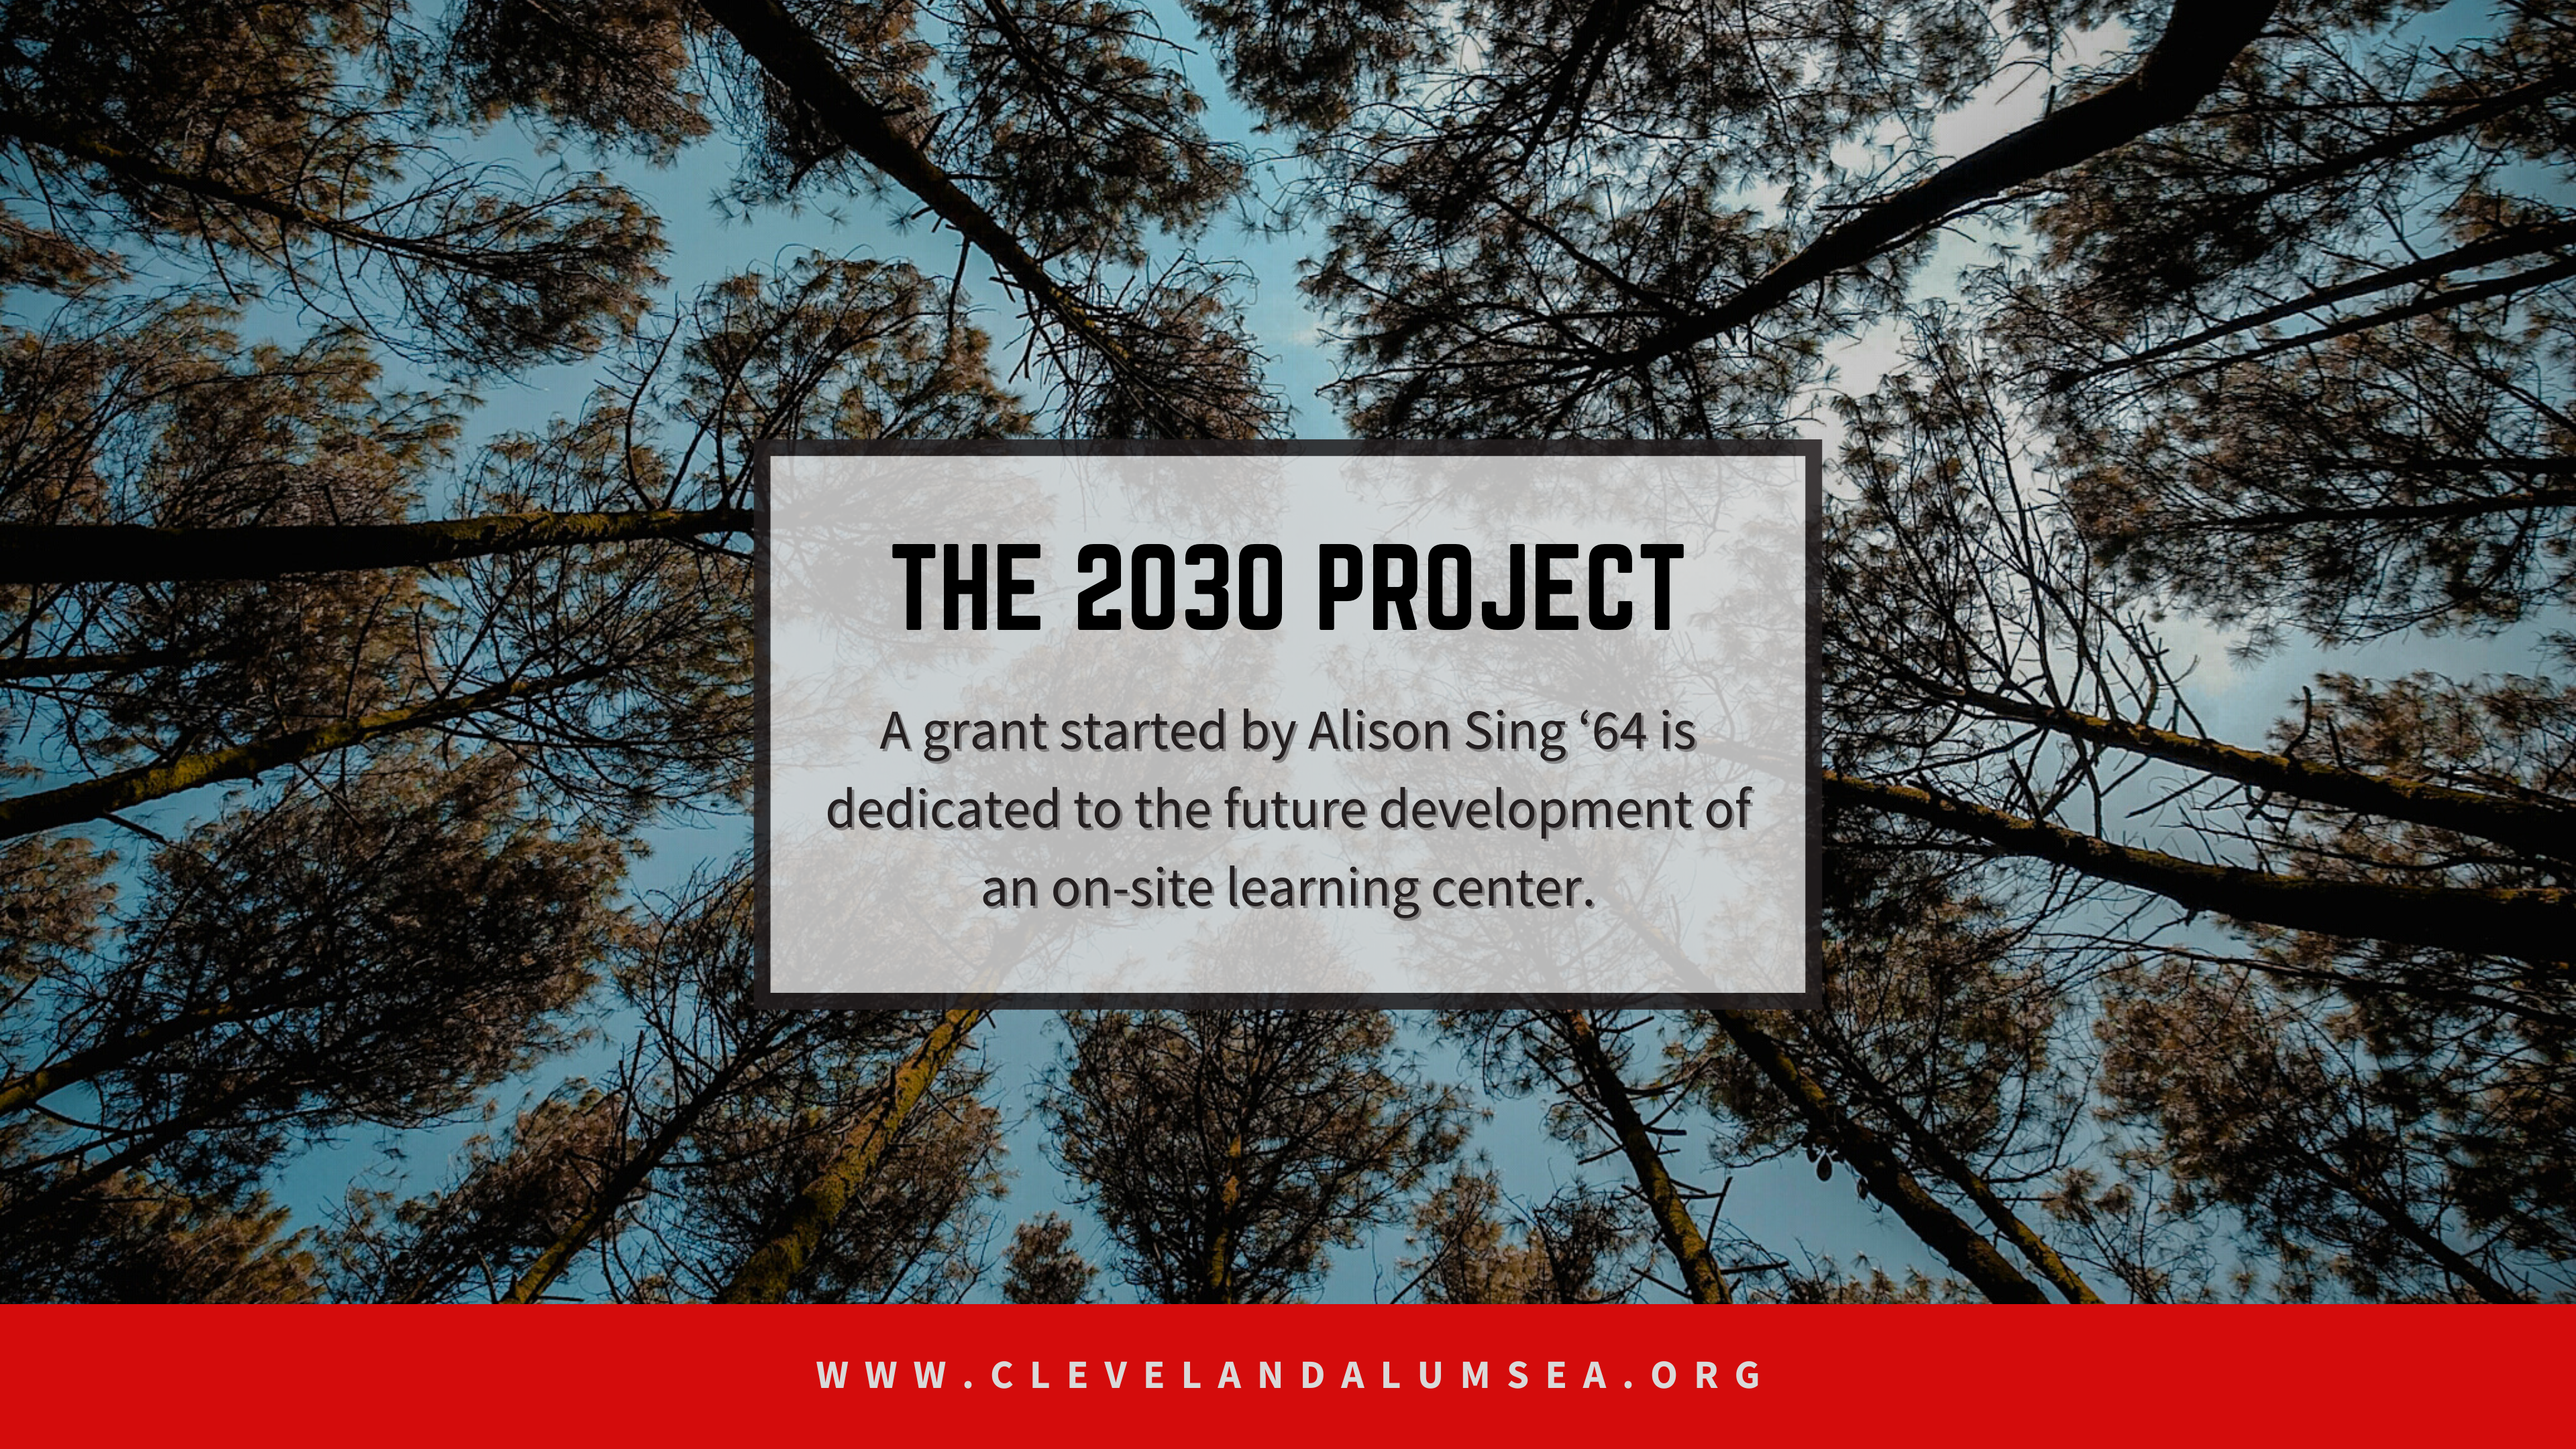 The 2030 Project